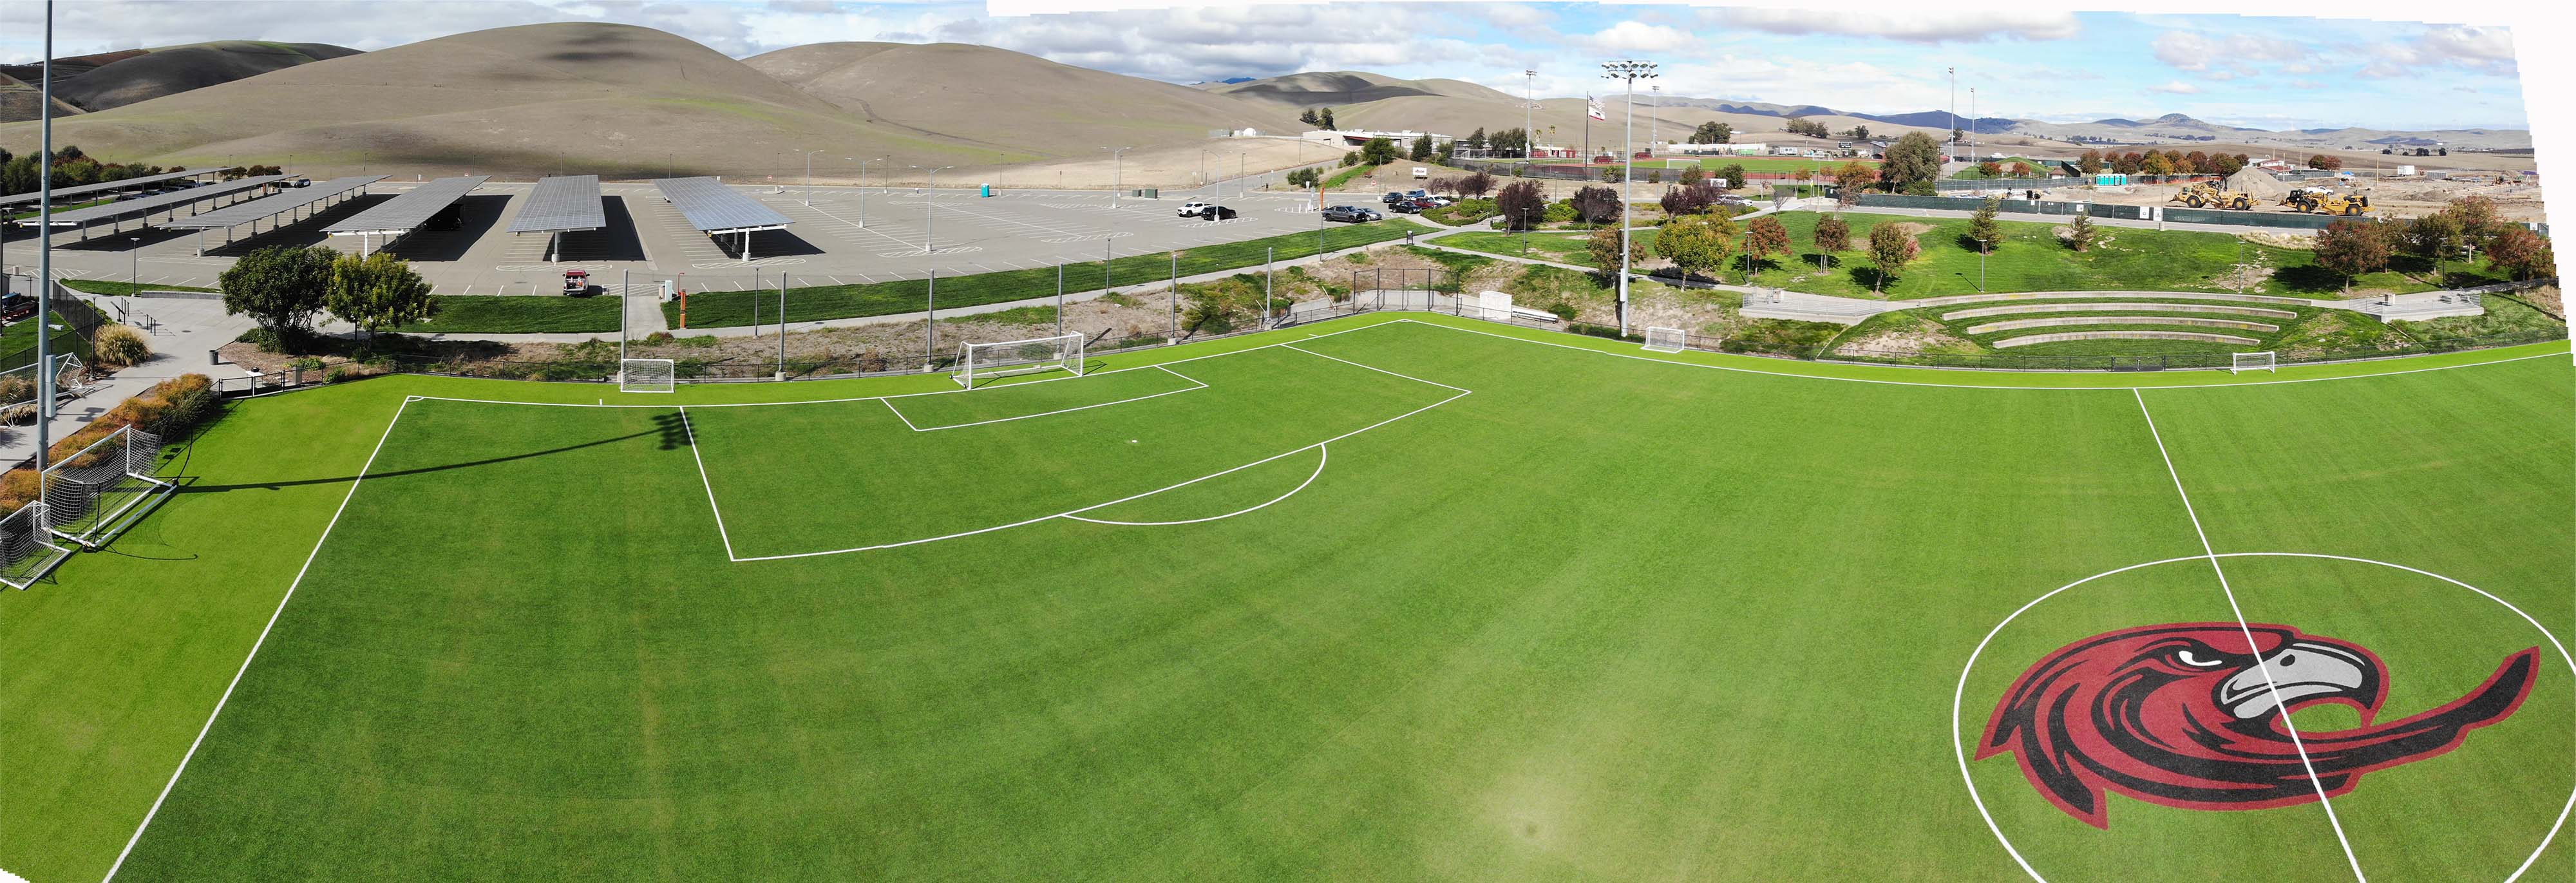 Aerial view of athletic field